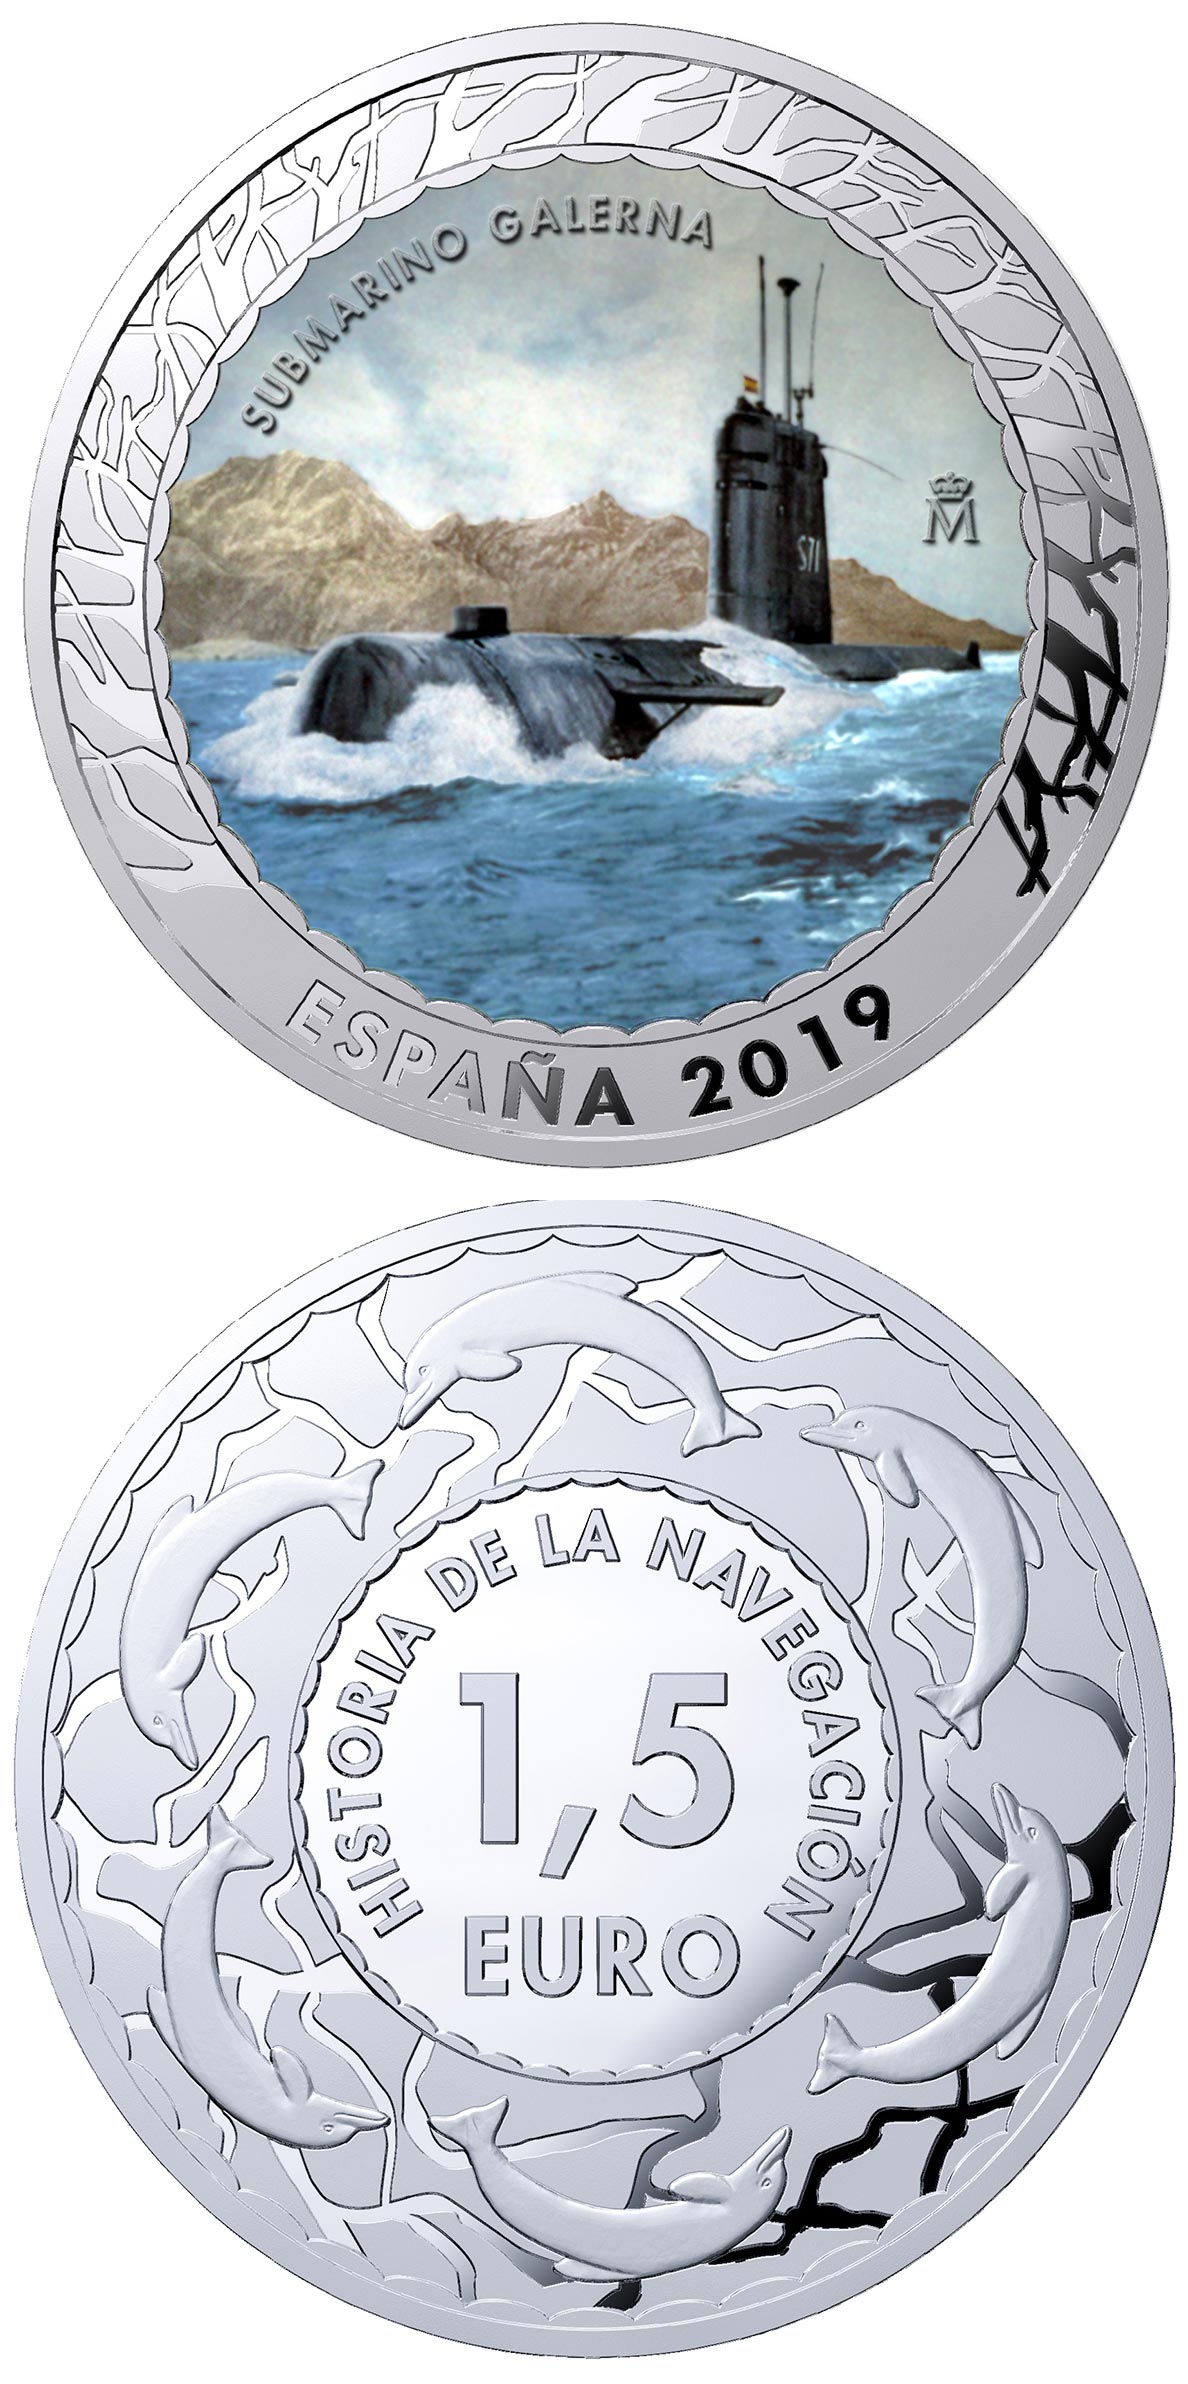 Image of 1.5 euro coin - Submarine Galerna | Spain 2019.  The Copper–Nickel (CuNi) coin is of BU quality.